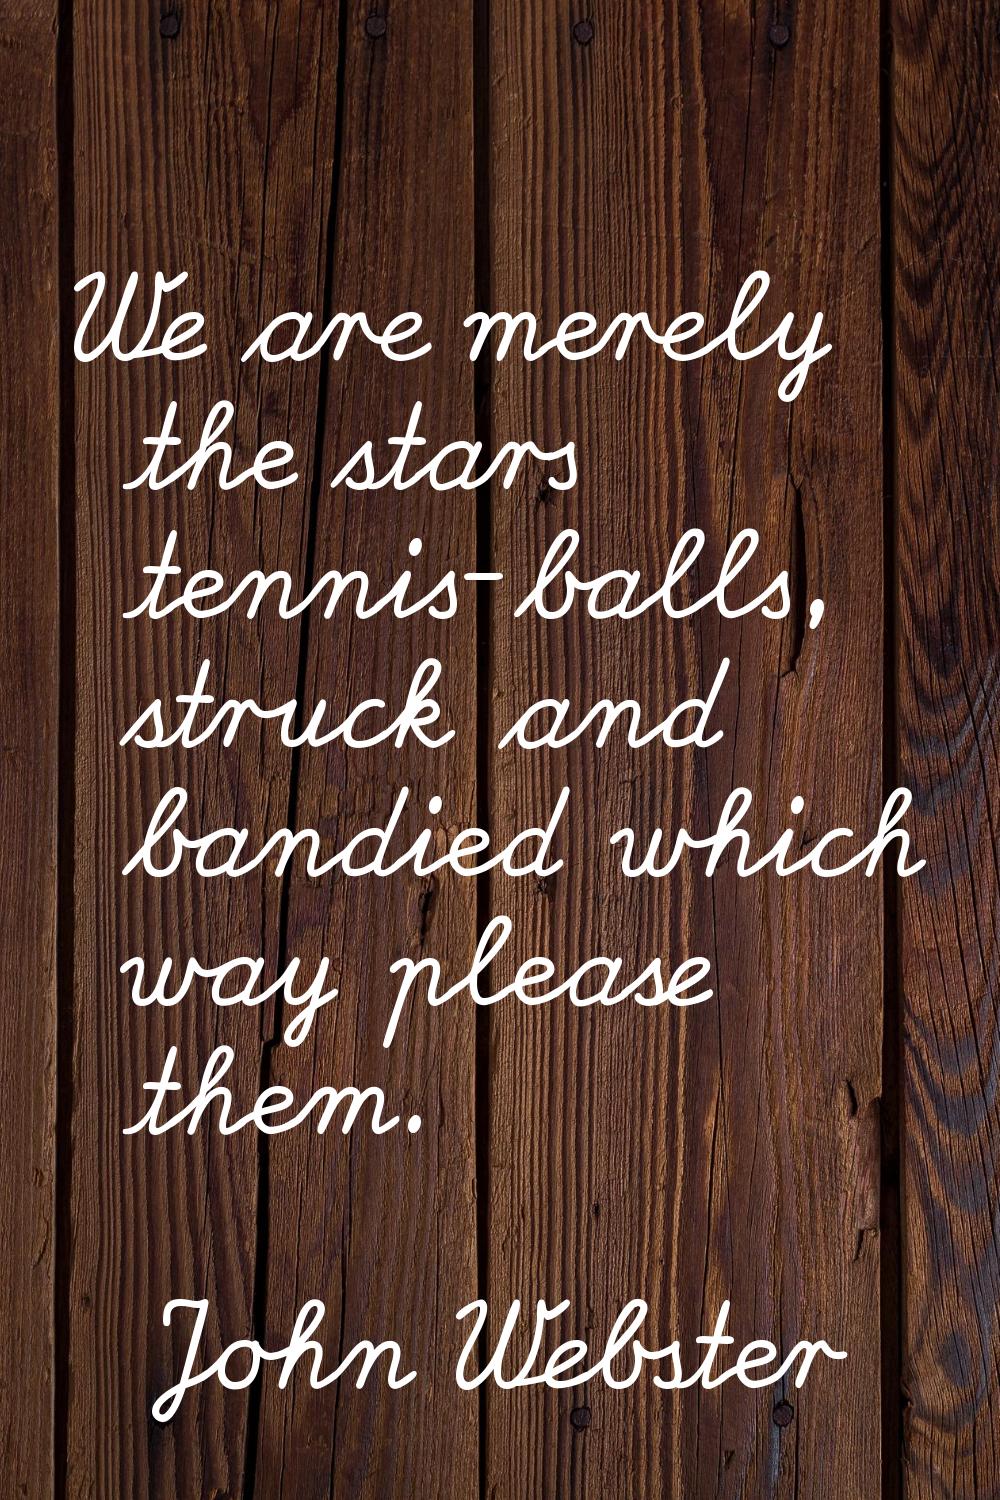 We are merely the stars tennis-balls, struck and bandied which way please them.